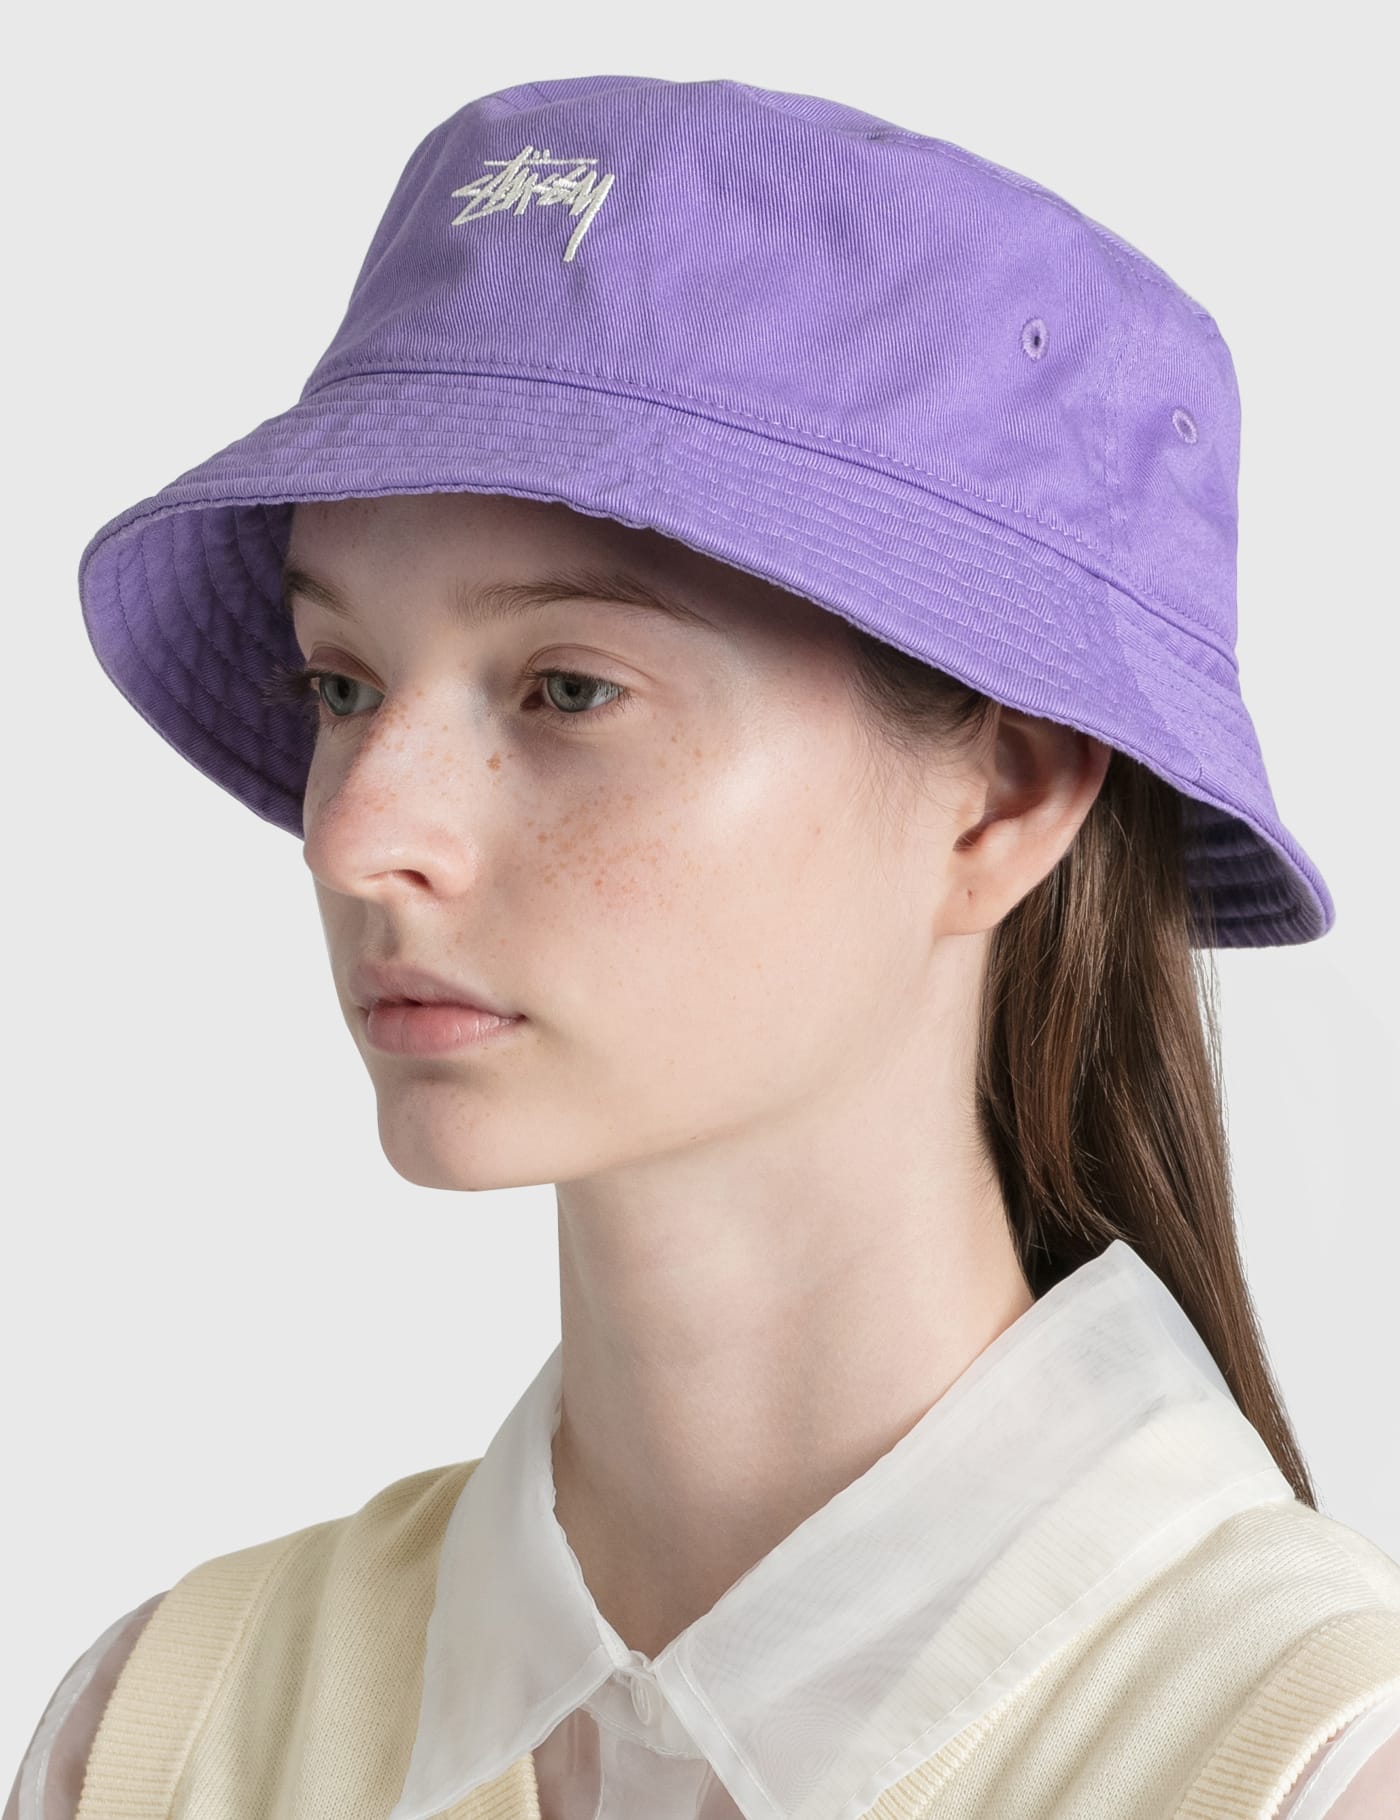 Stüssy - Stock Bucket Hat | HBX - Globally Curated Fashion and